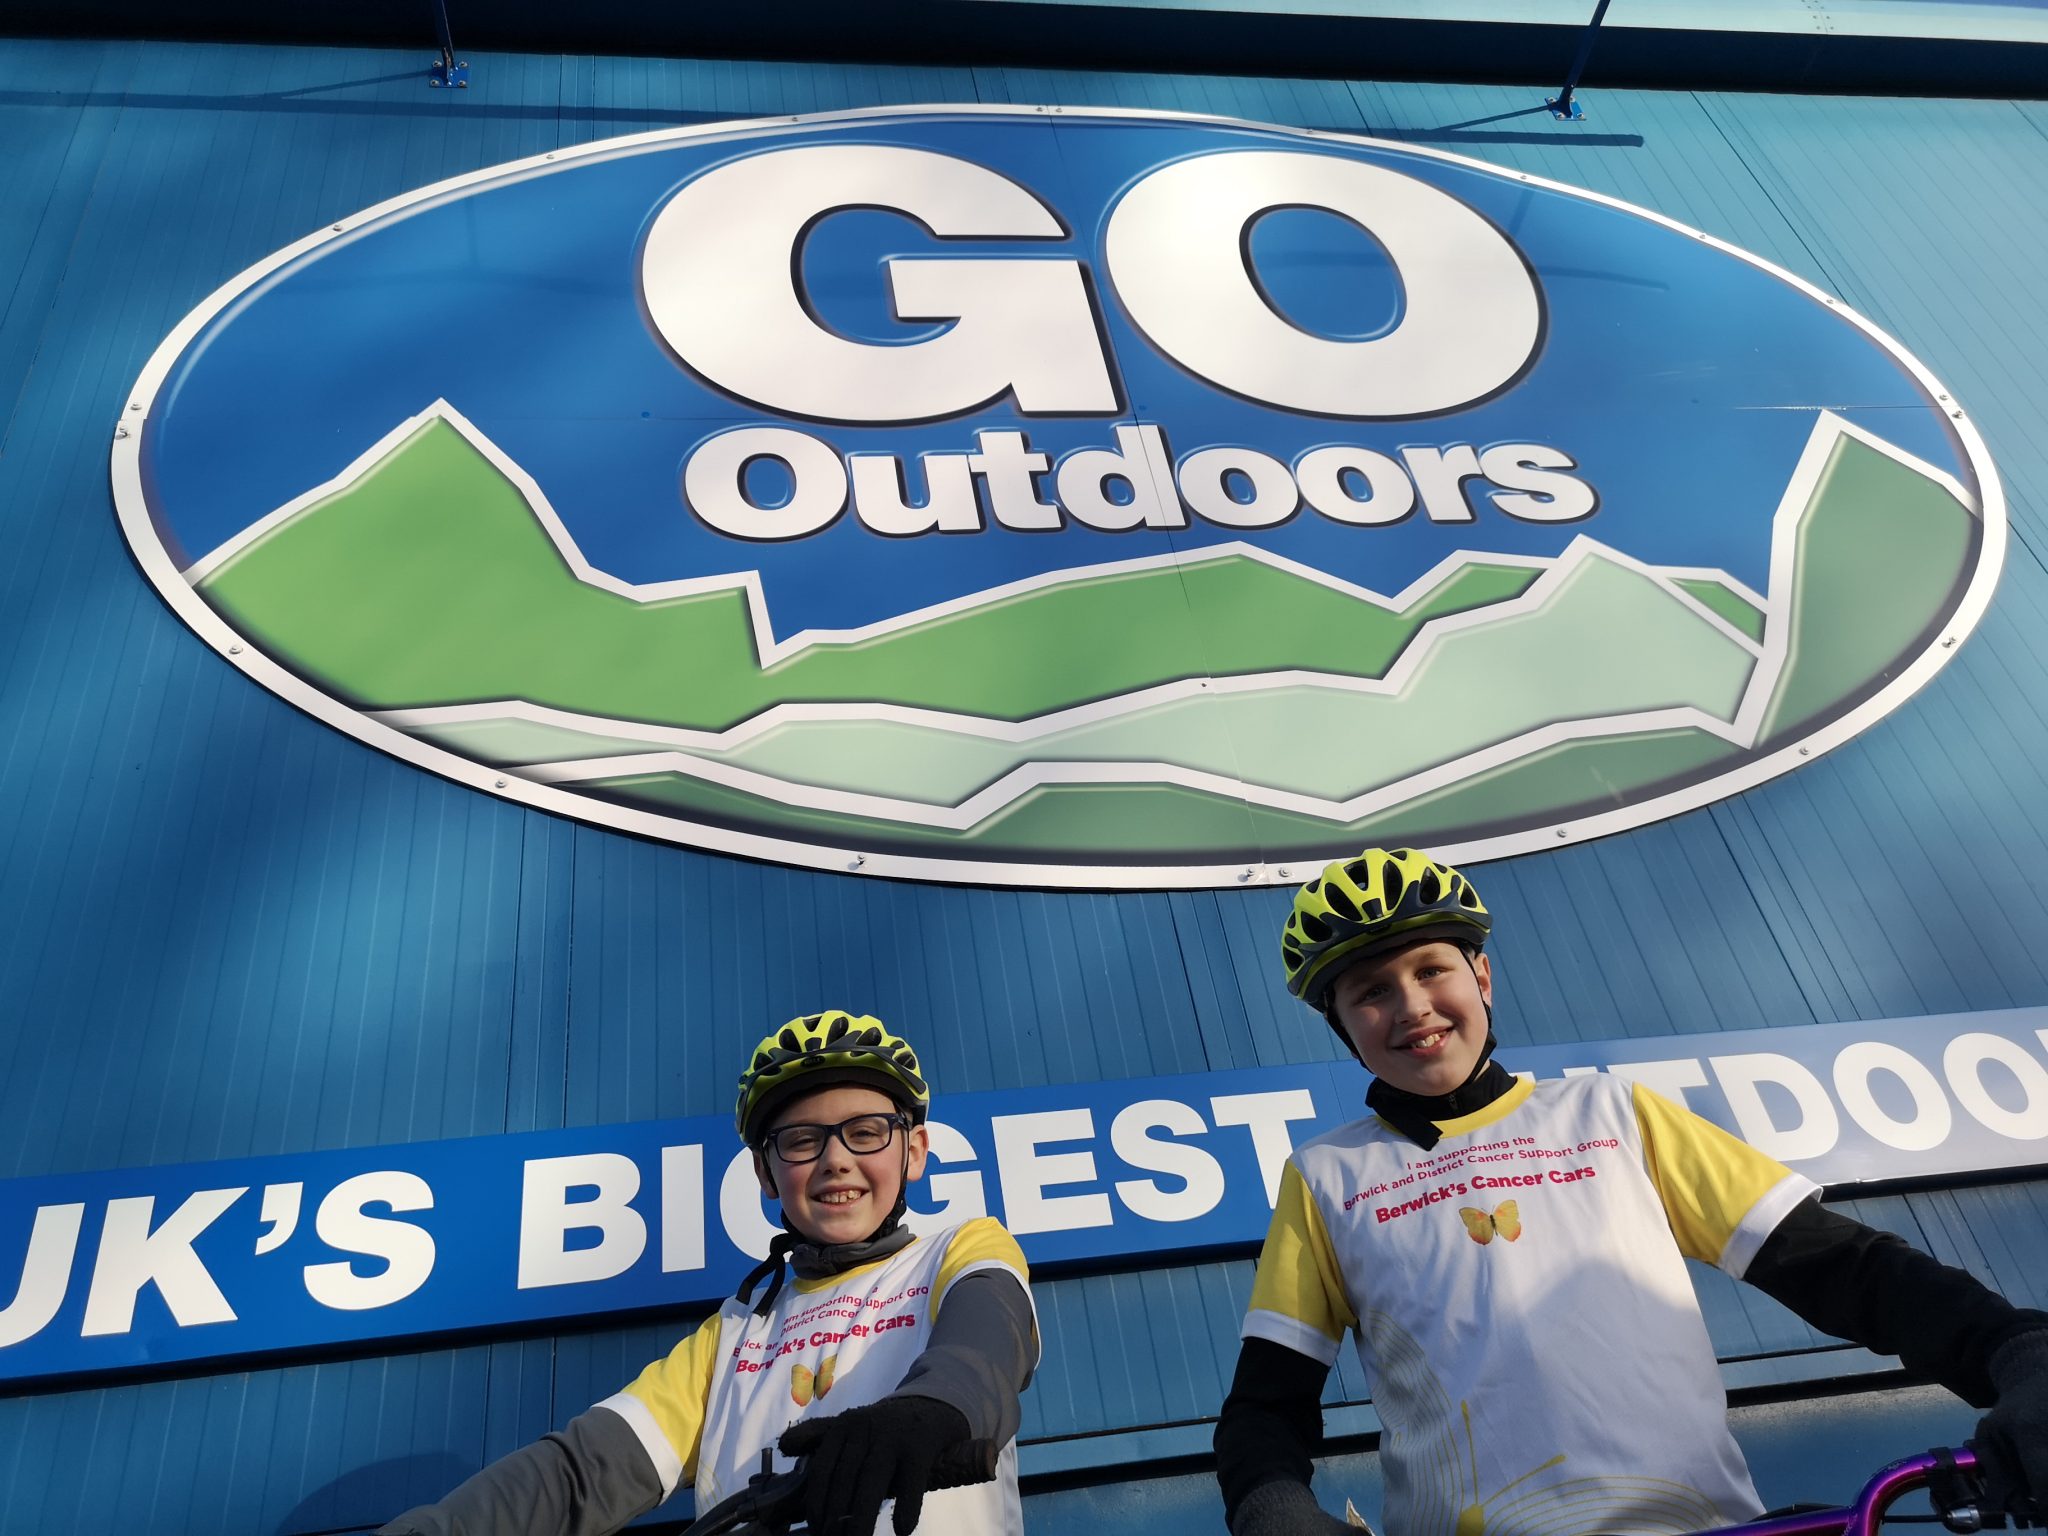 Berwick Cancer Cars - Lennox and Tommy Go Outdoors Cycle Helmet Sponsor